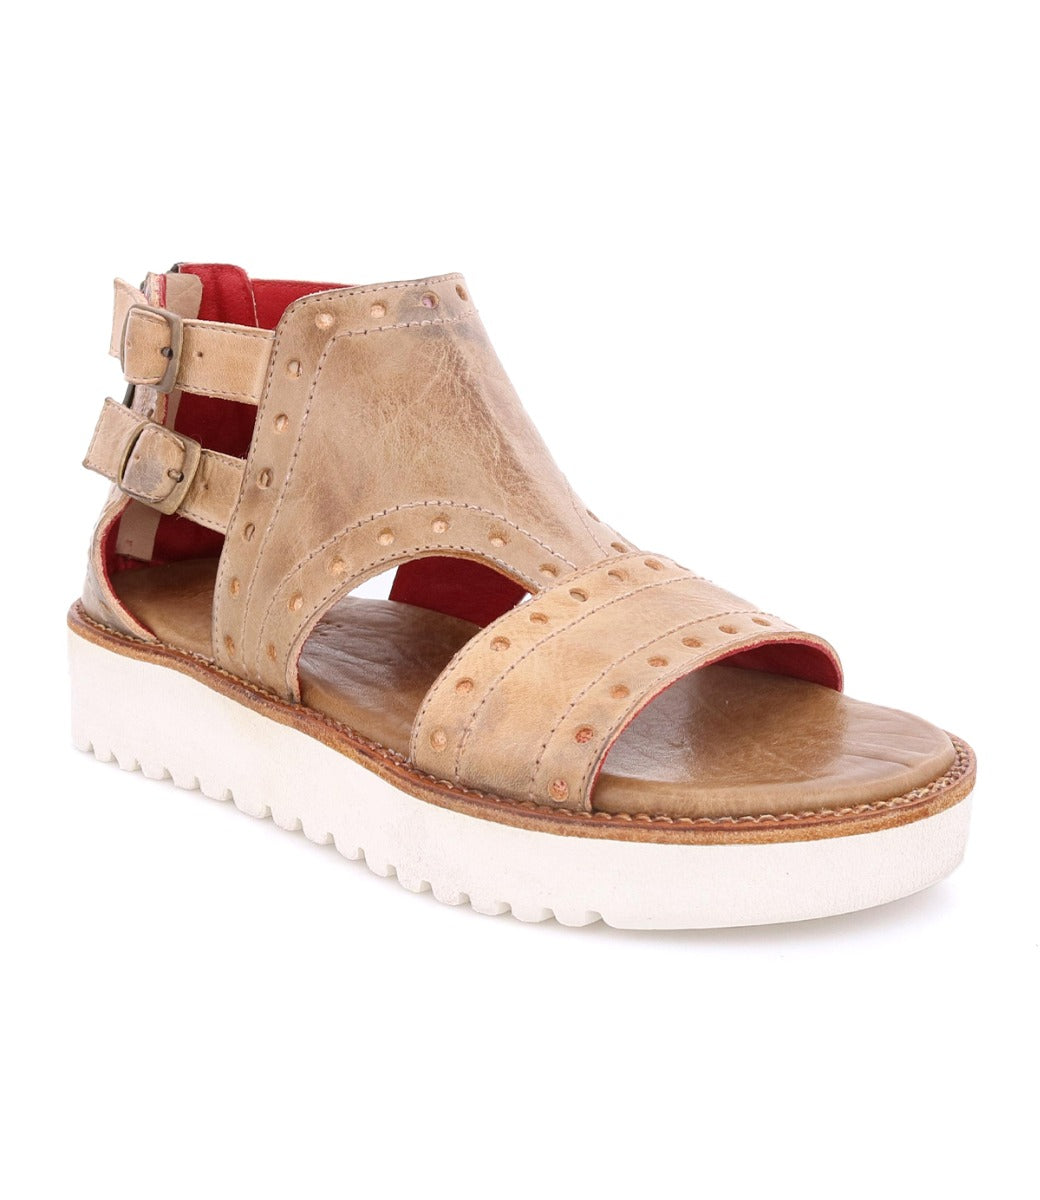 A women's Camden sandal by Bed Stu with two straps and a white sole.